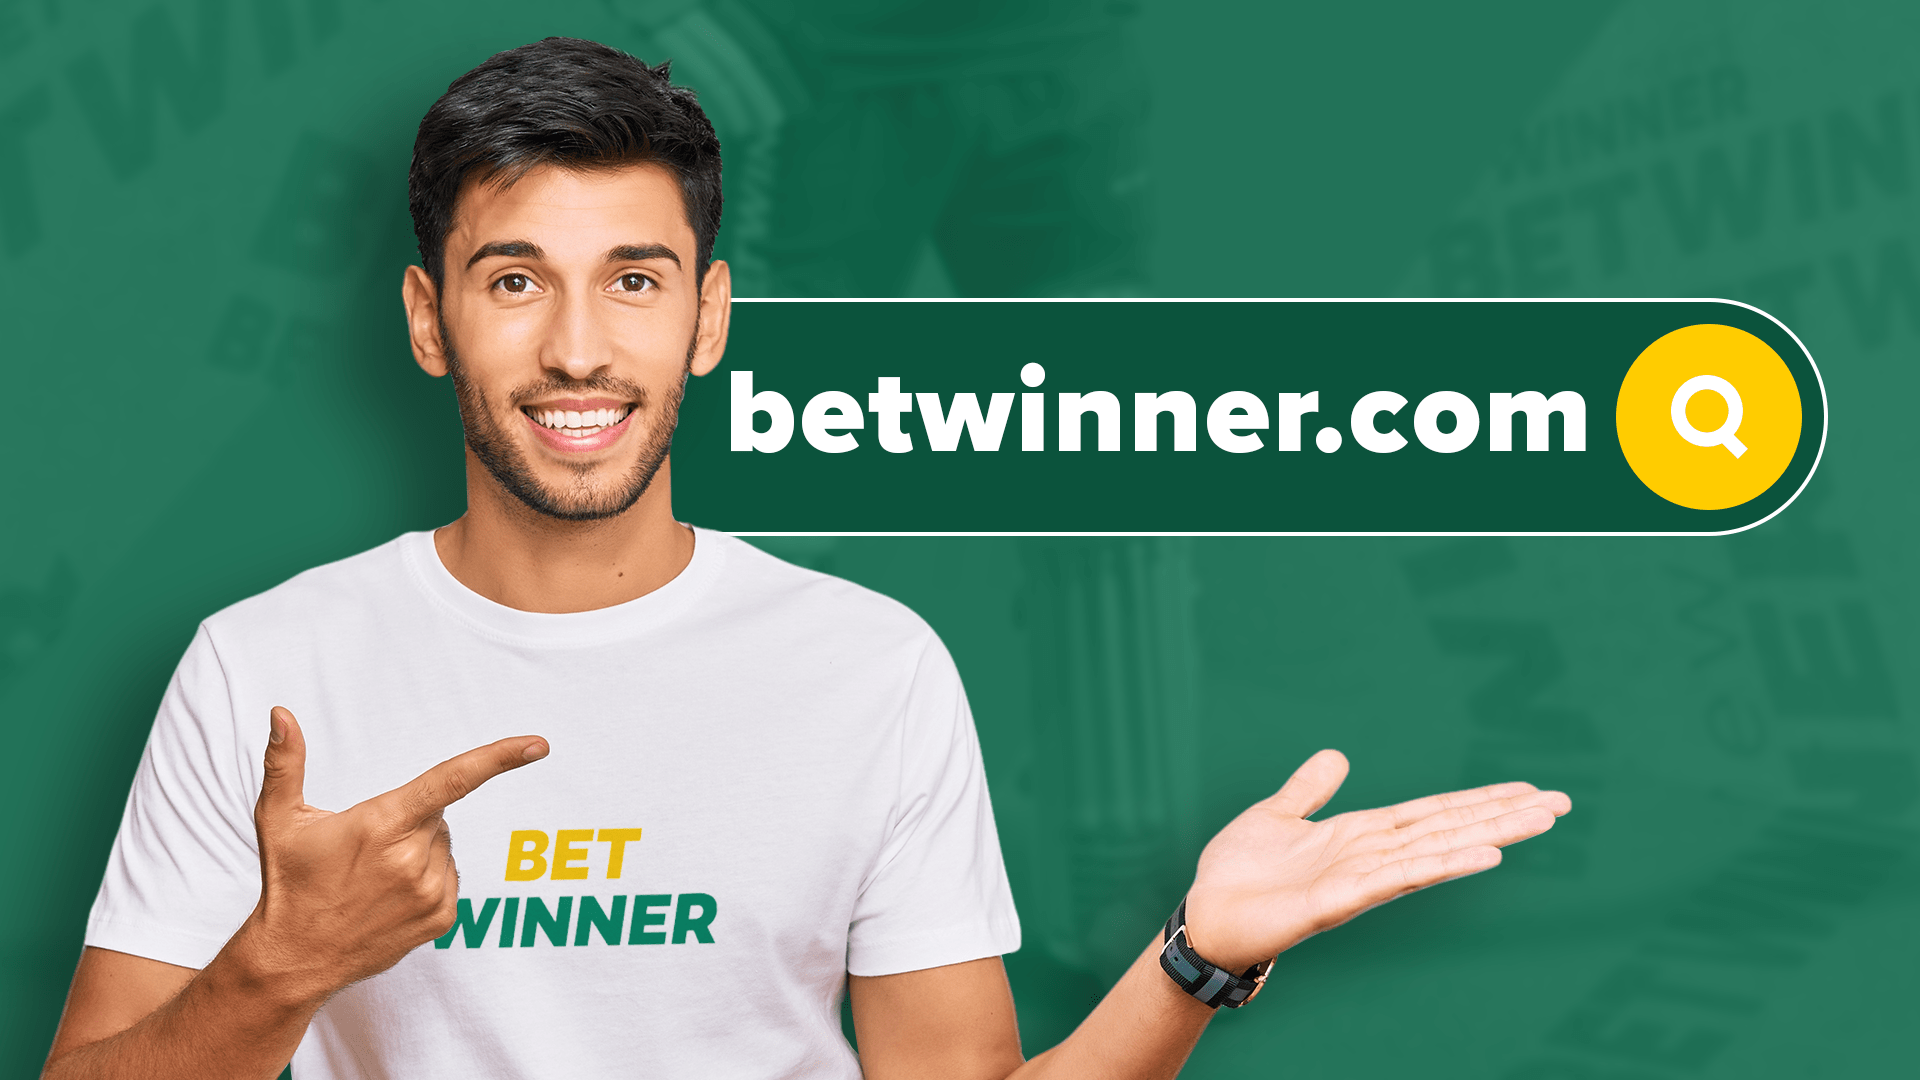 3 Ways Twitter Destroyed My betwinner partner Without Me Noticing